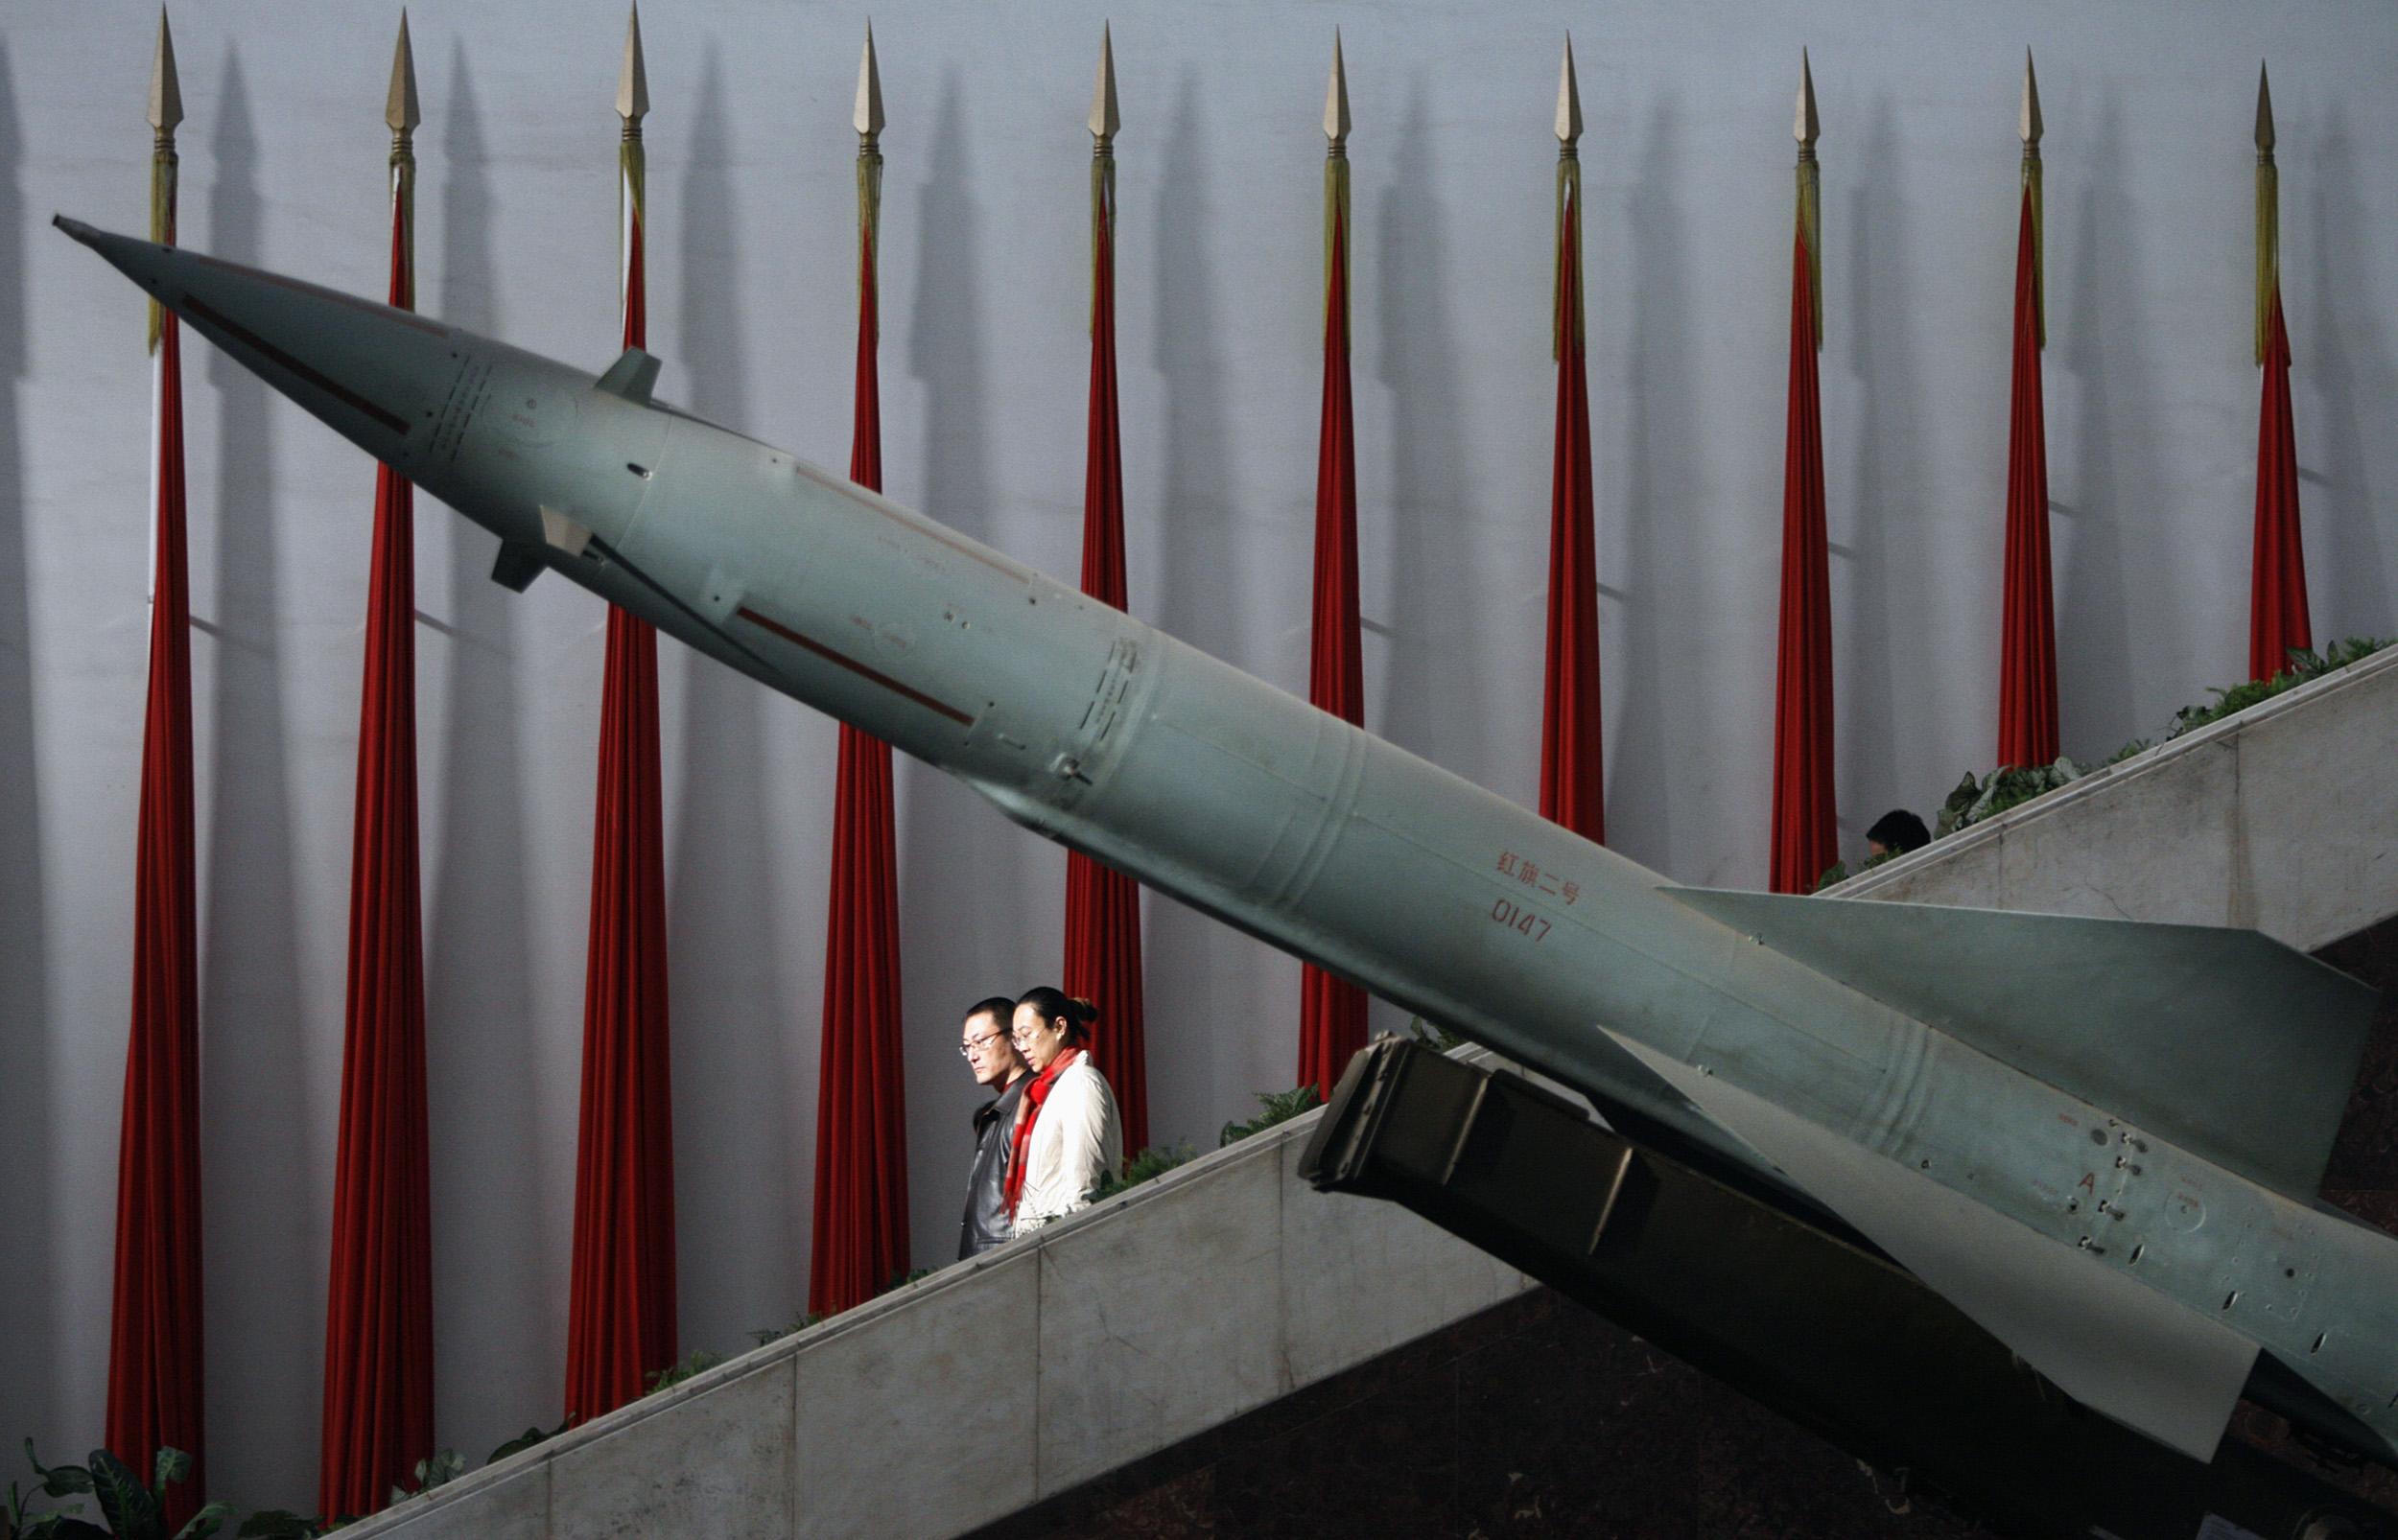 A missile at the Military Museum in Beijing – China has pledged not to be the first to discharge a nuclear weapon ‘under any circumstances’